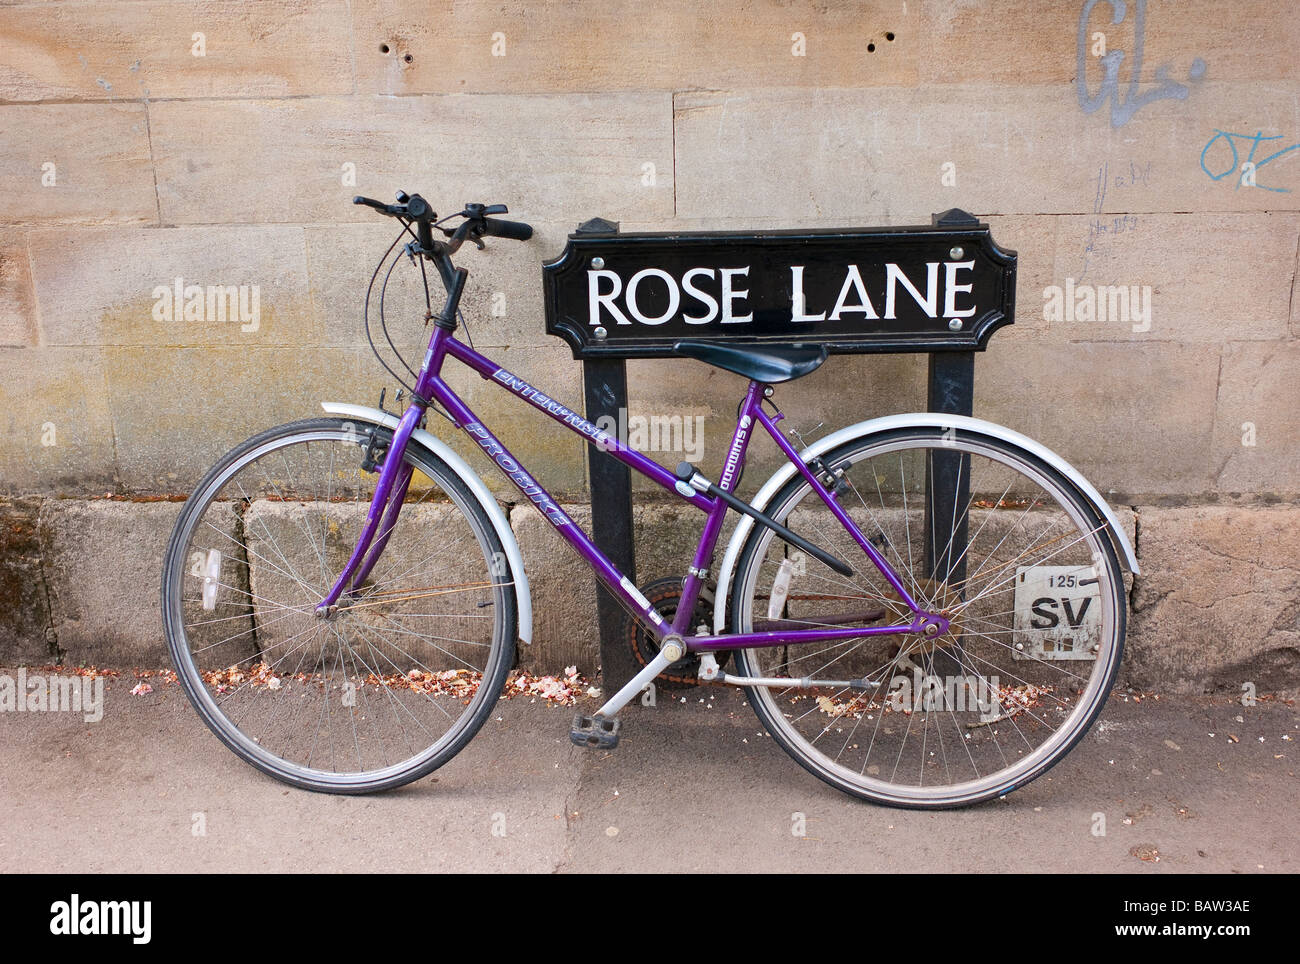 Ladies bicycle chained to street sign in Oxford Stock Photo